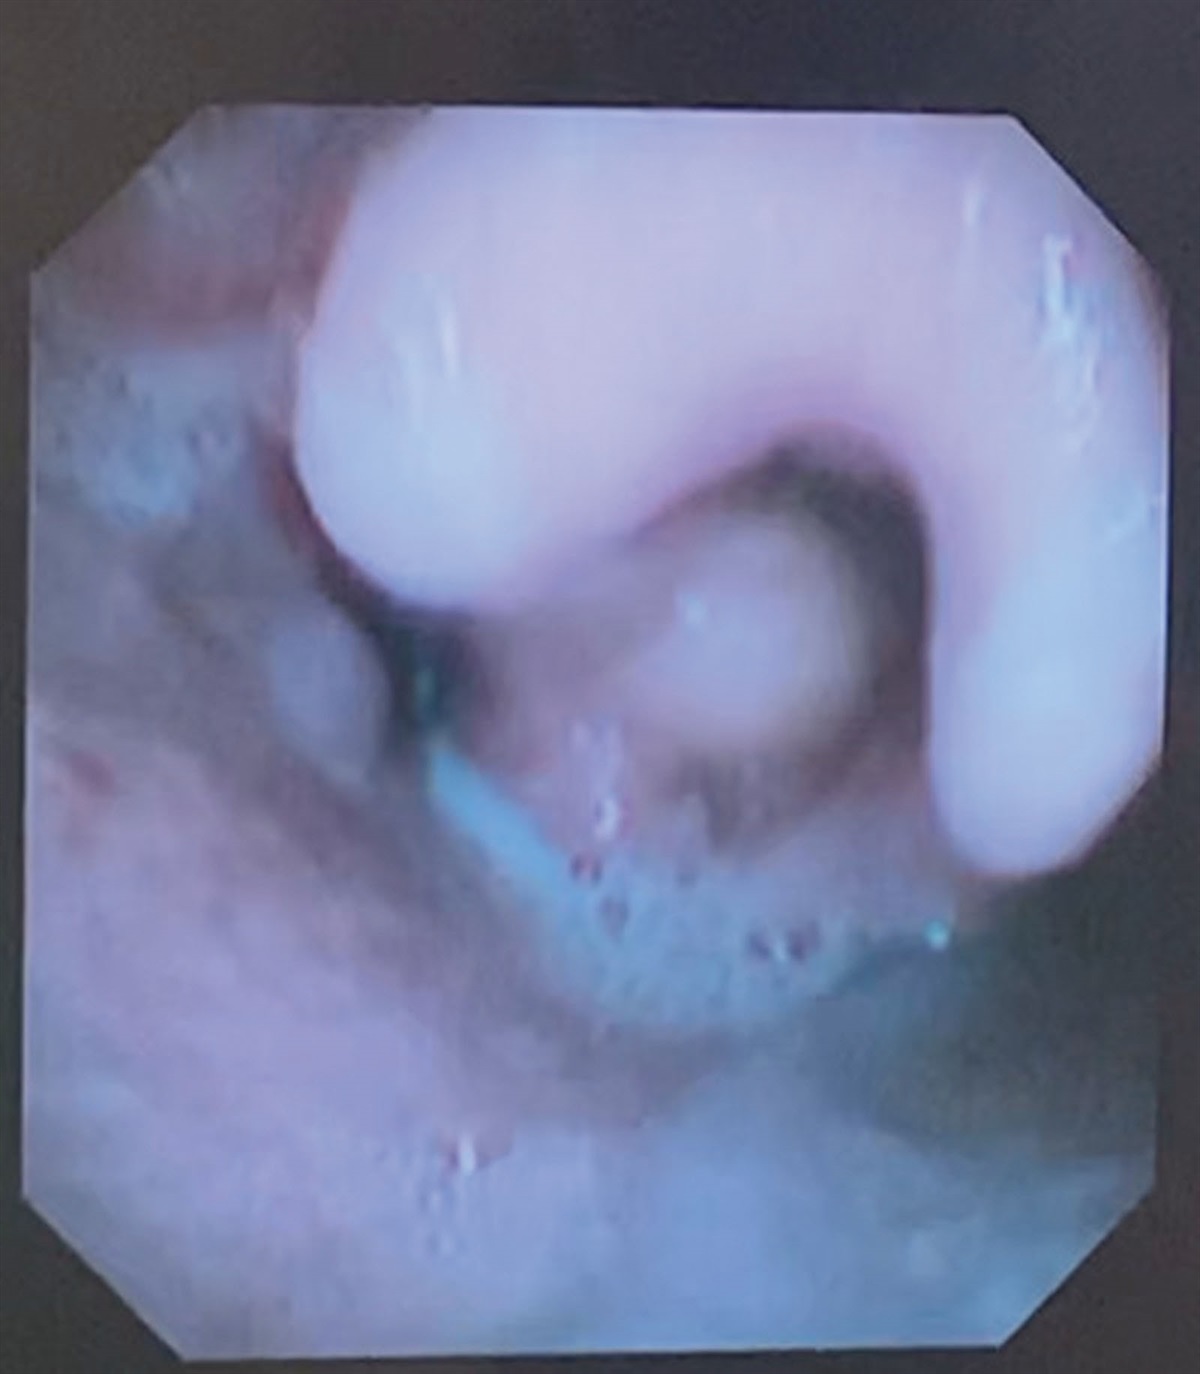 Aryepiglottic Cyst Developed Hours After Tracheal Intubation Causing Acute Upper Airway Ball-Valve Obstruction: A Case Report